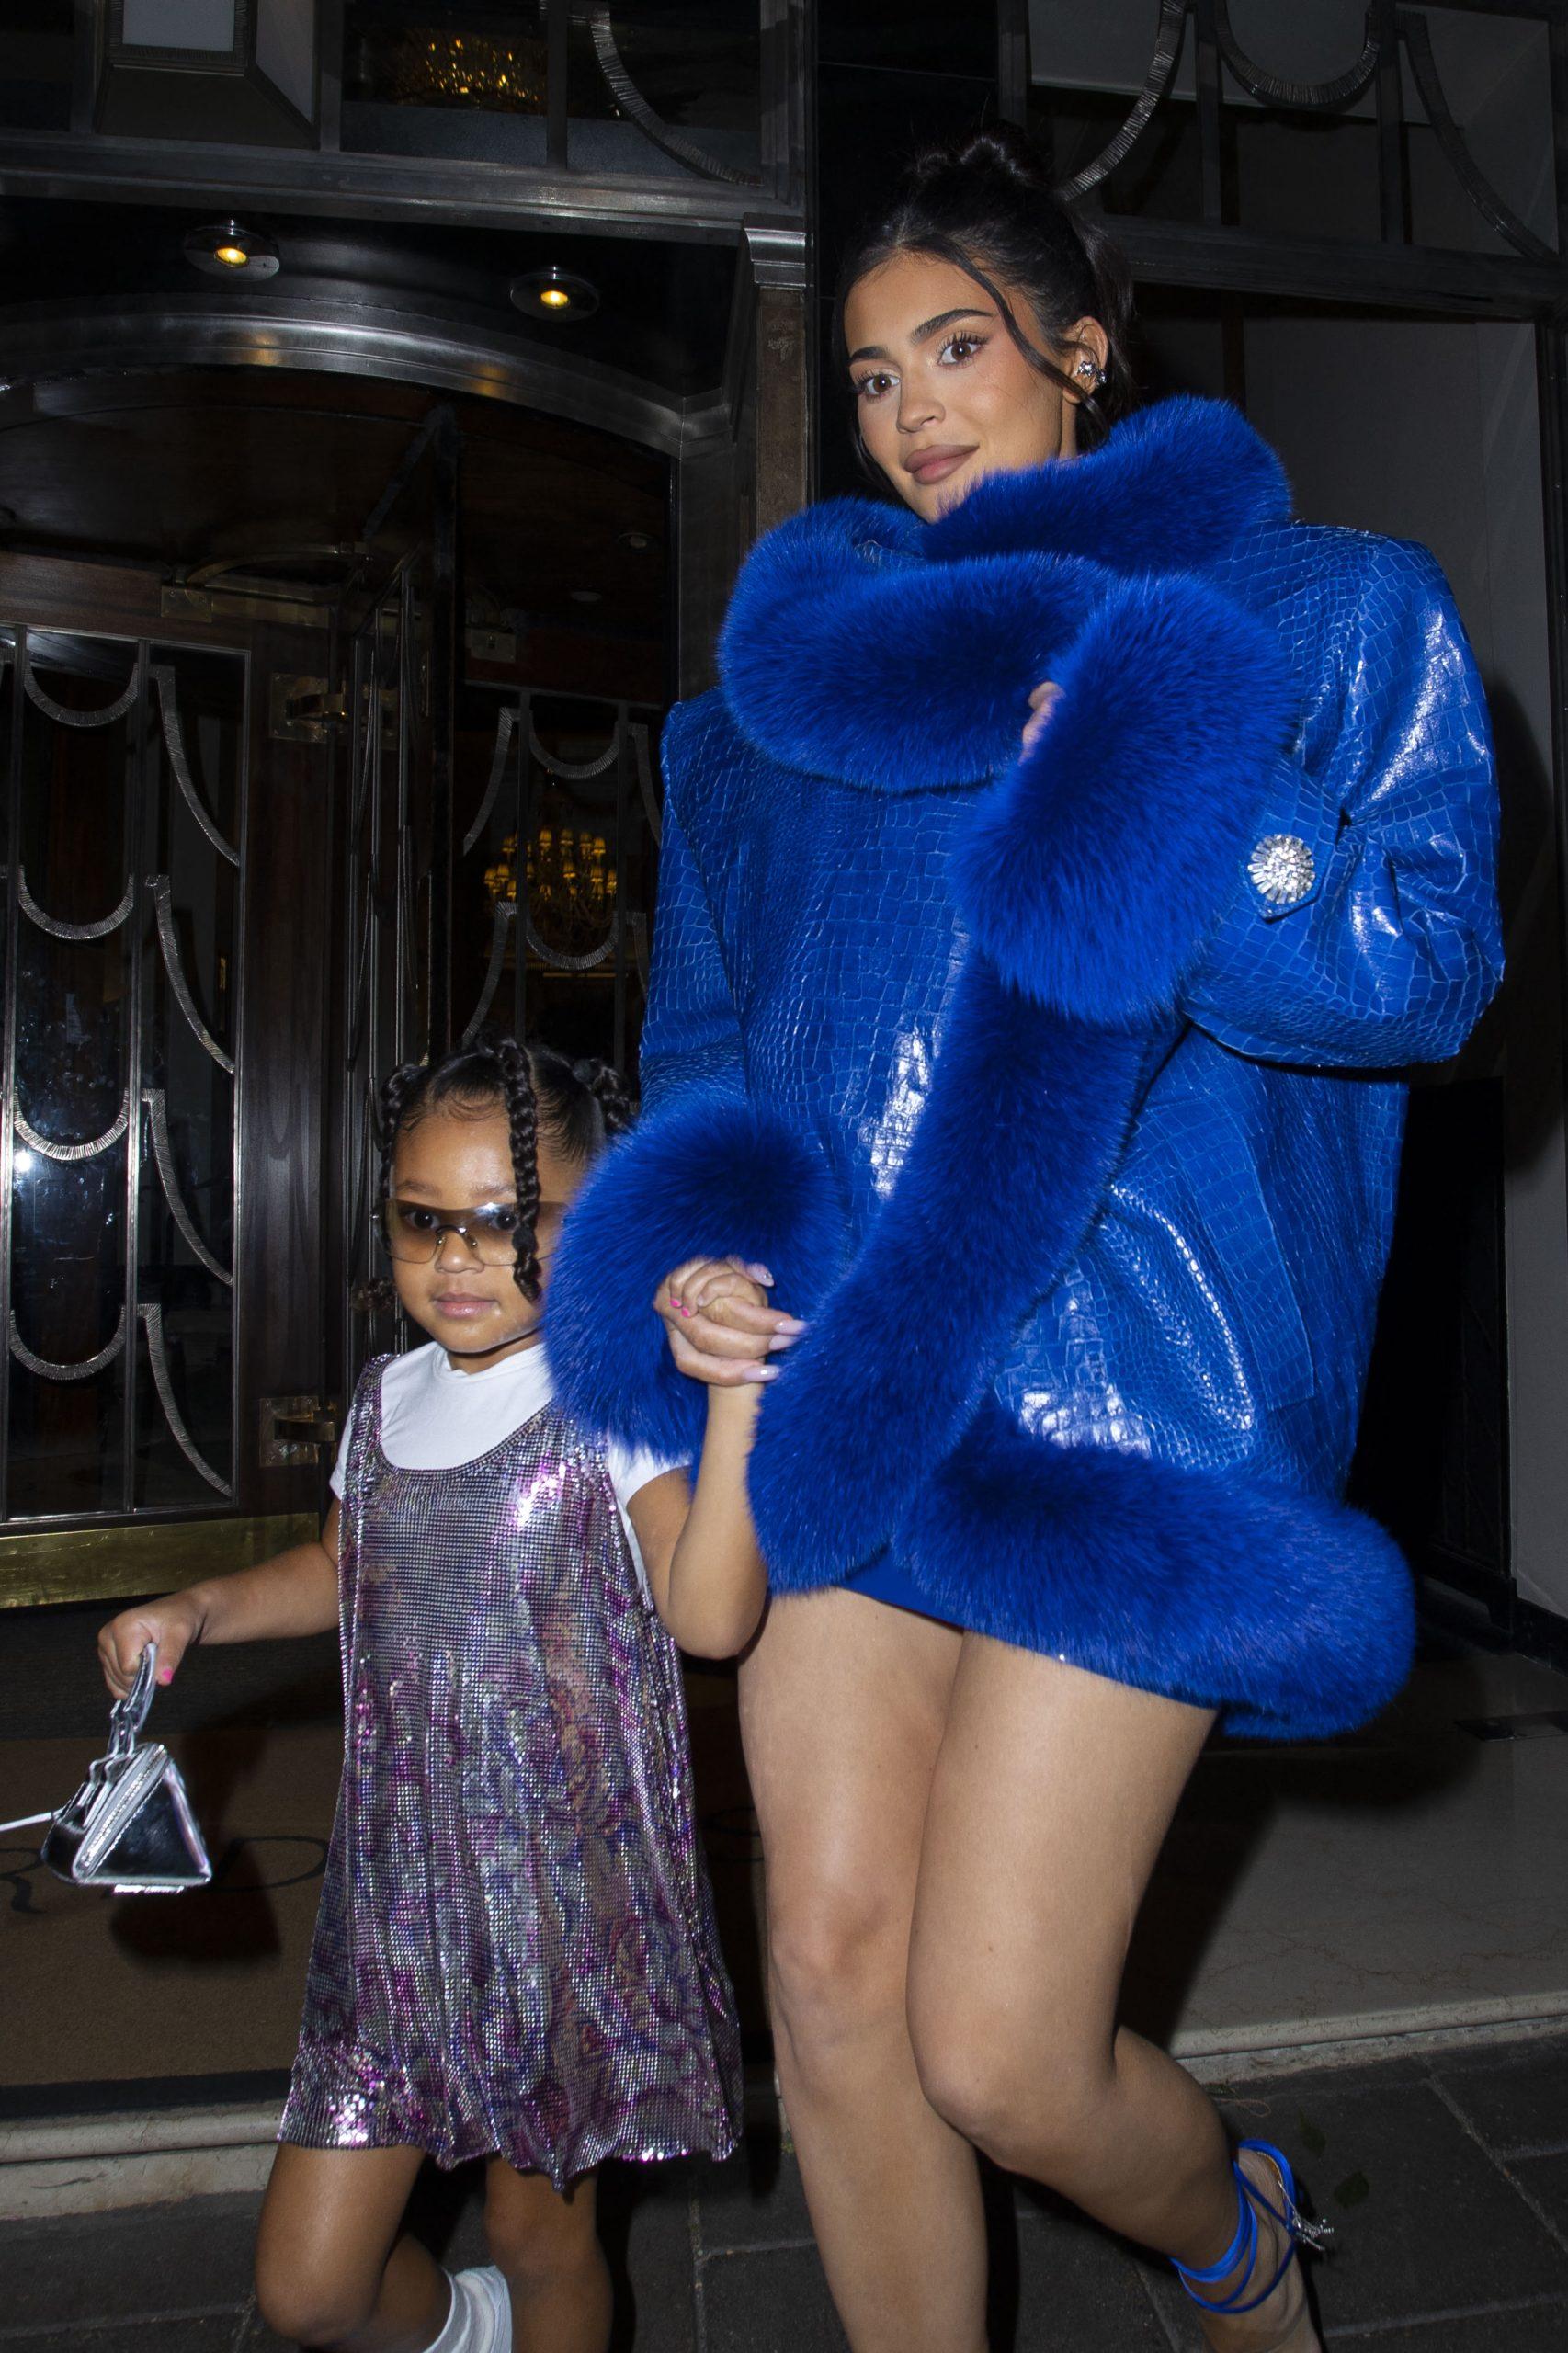 Kylie Jenner and daughter Stormi wow fans as they leave their hotel wearing an oversized blue crocodile skin and fur coat, with a very leggy display